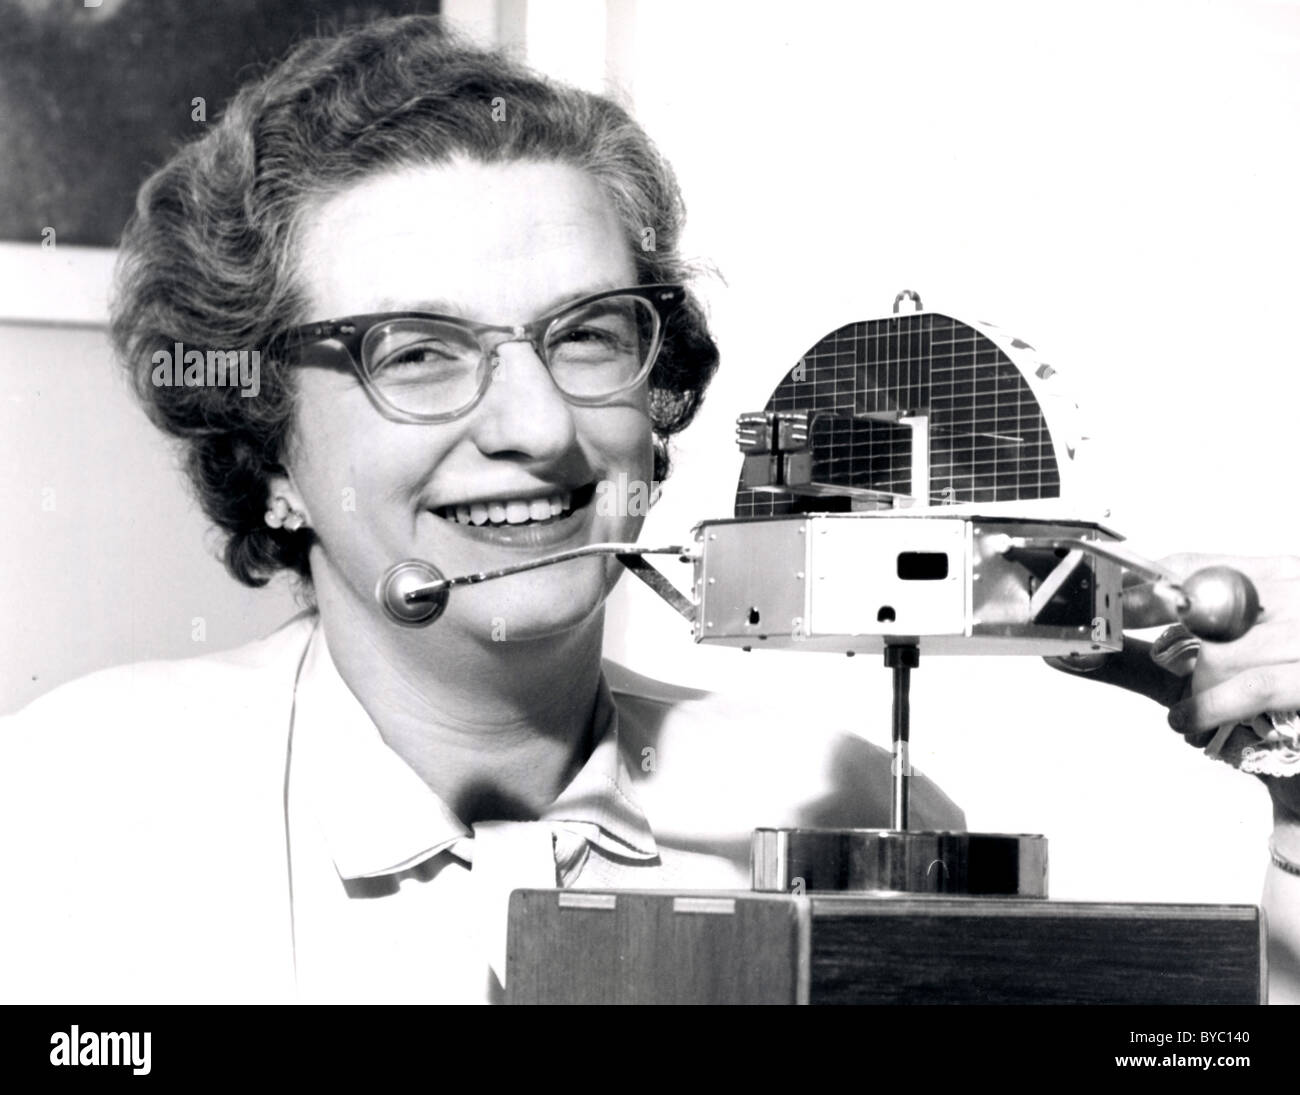 Dr. Nancy Roman, one of the America's top scientists in the space program, c.1950's Stock Photo